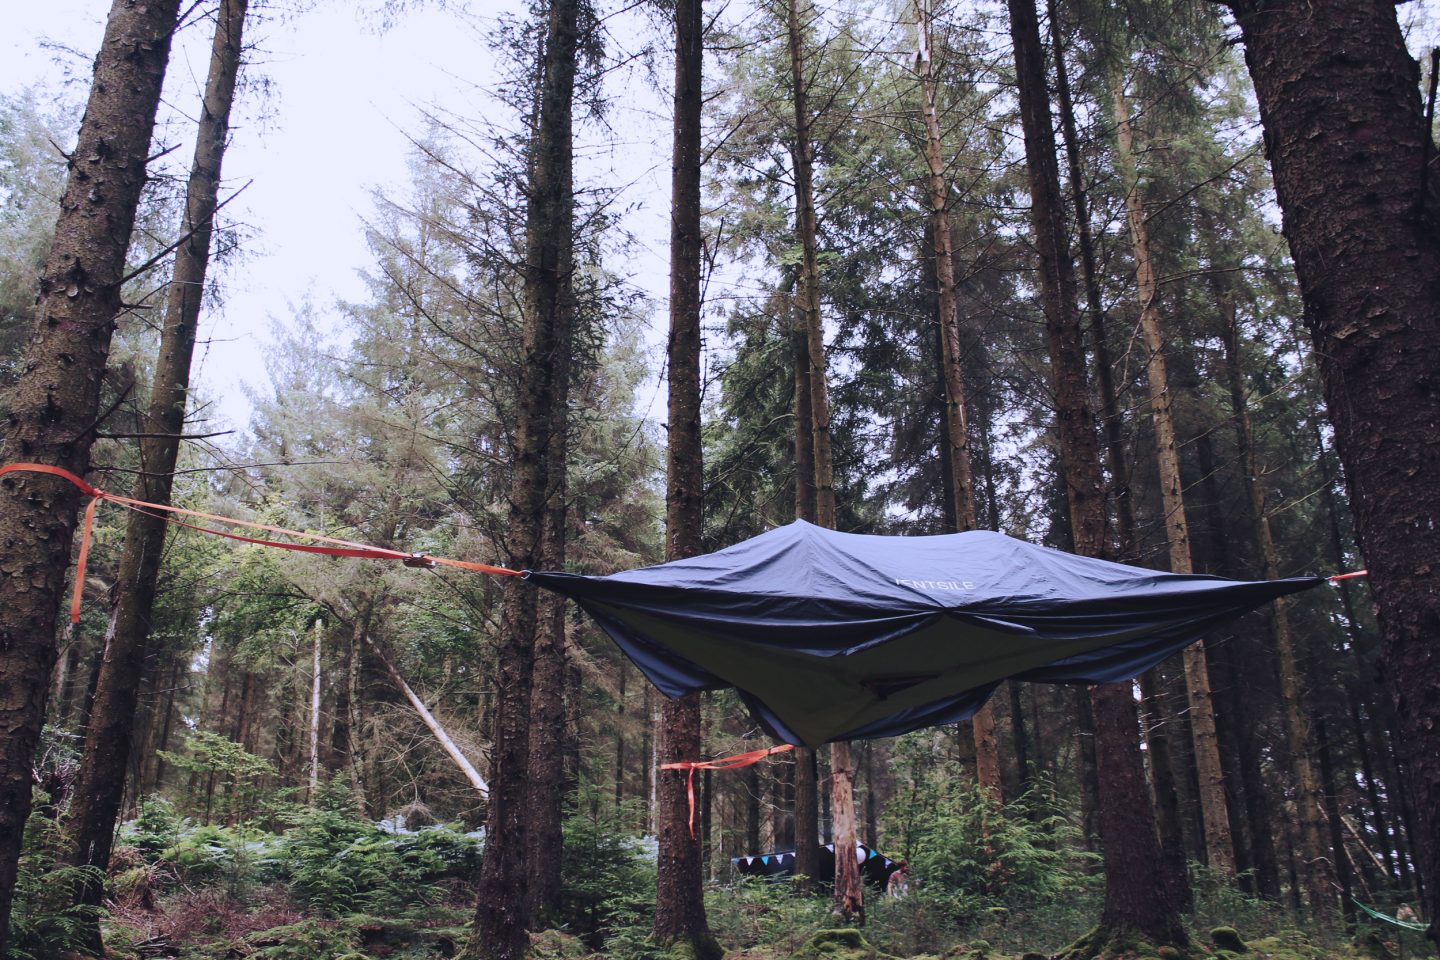 Treetop Camping in the Pine Forest